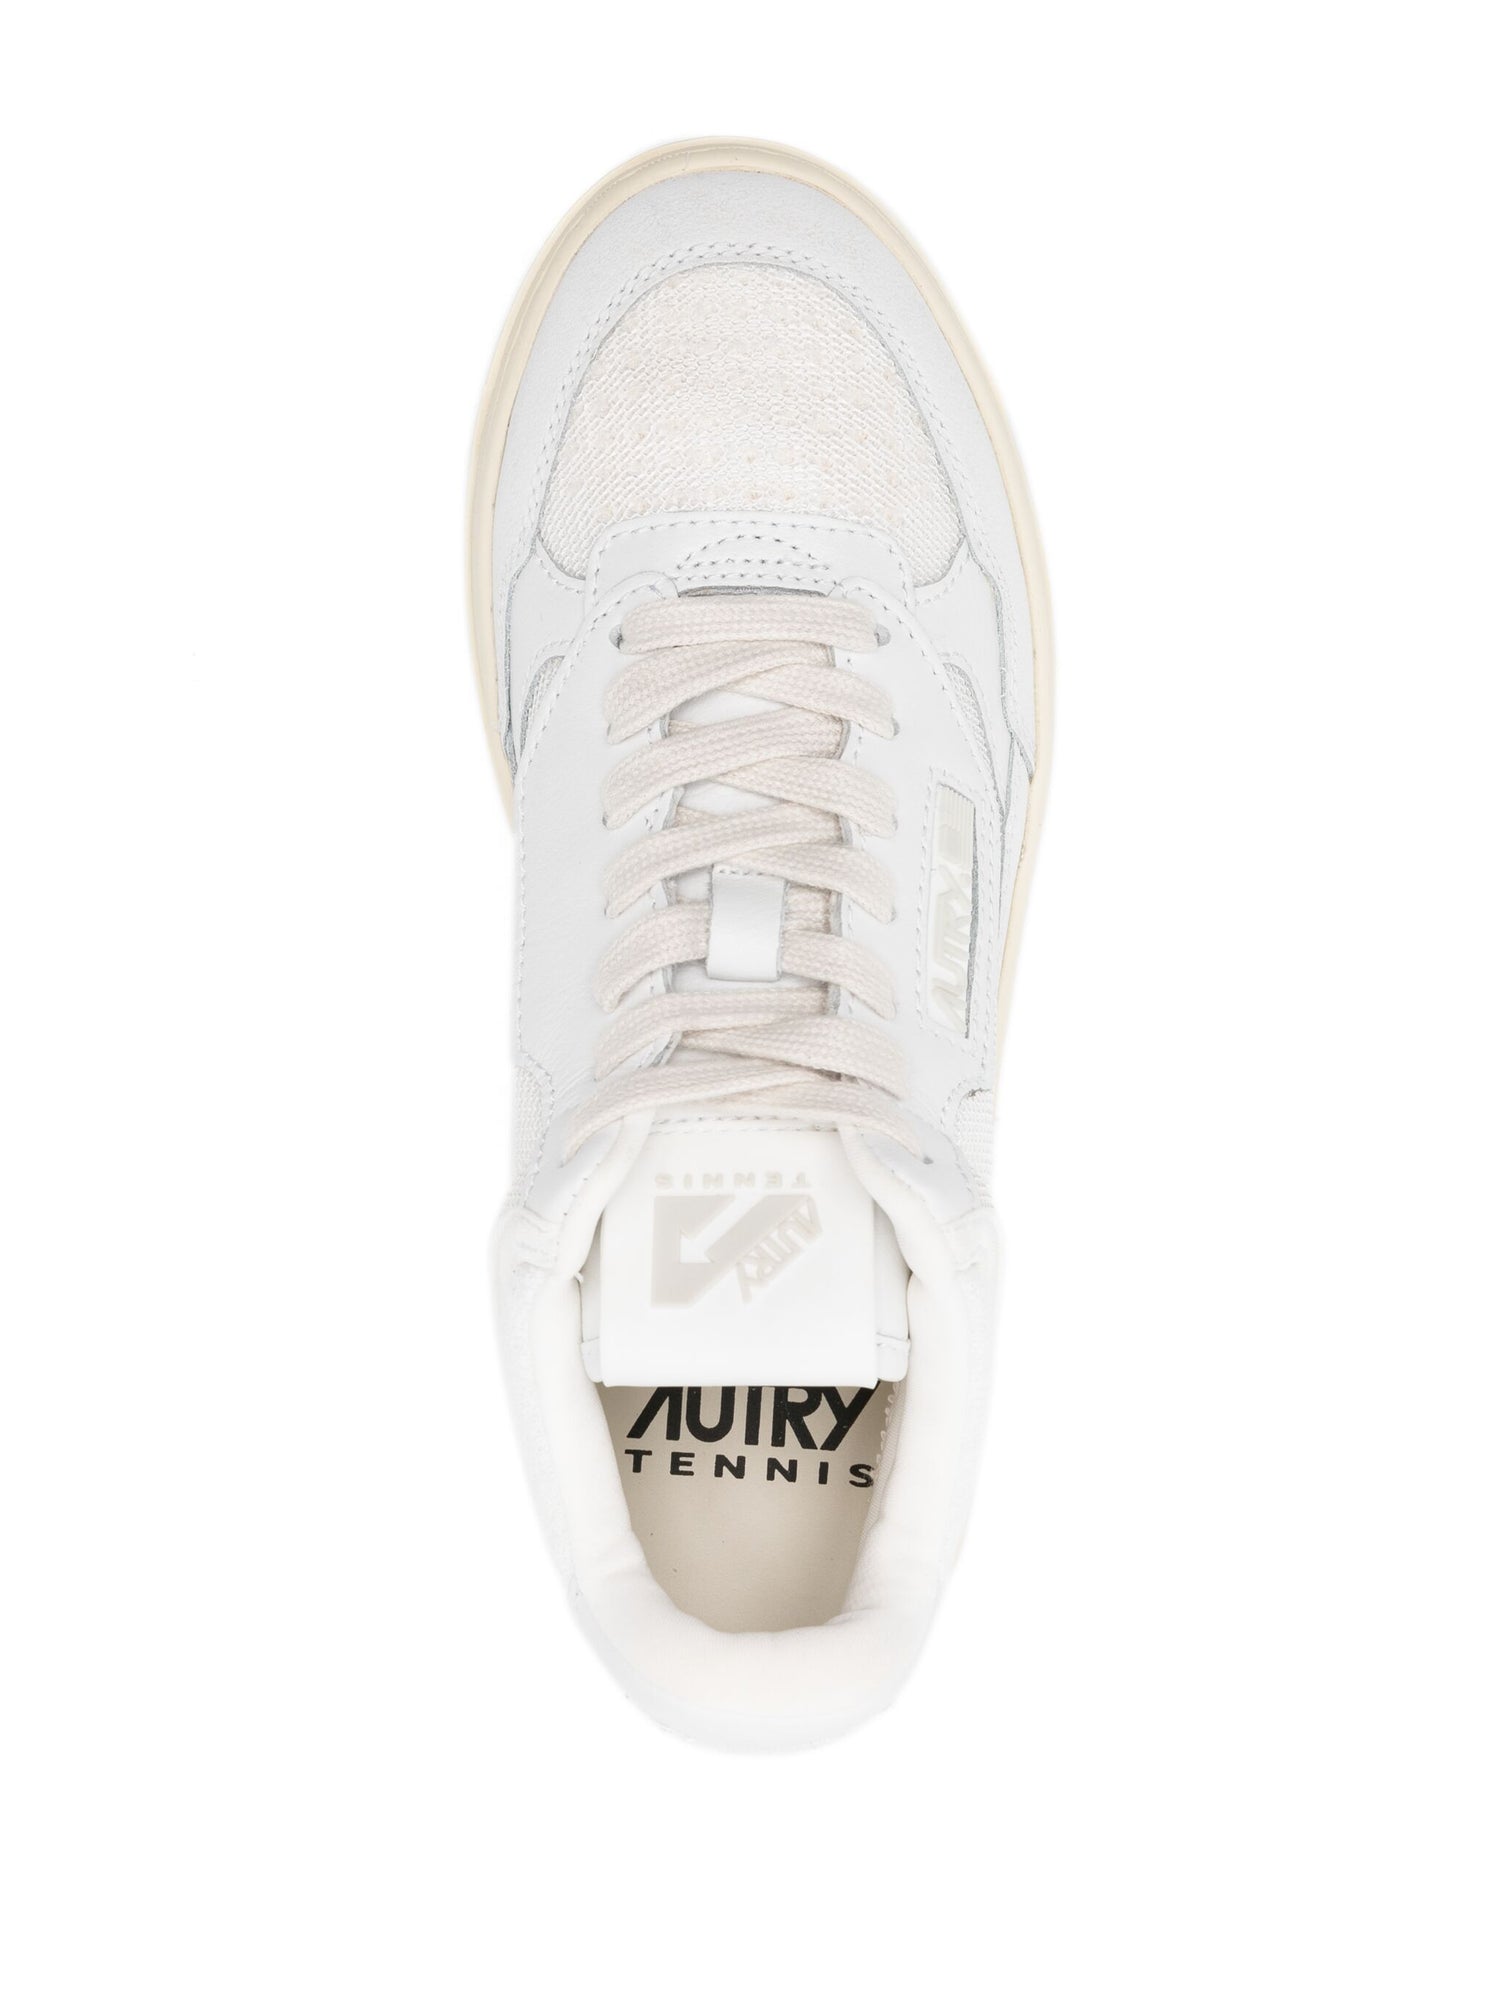 Tennis mid sneakers, tennis/leather white